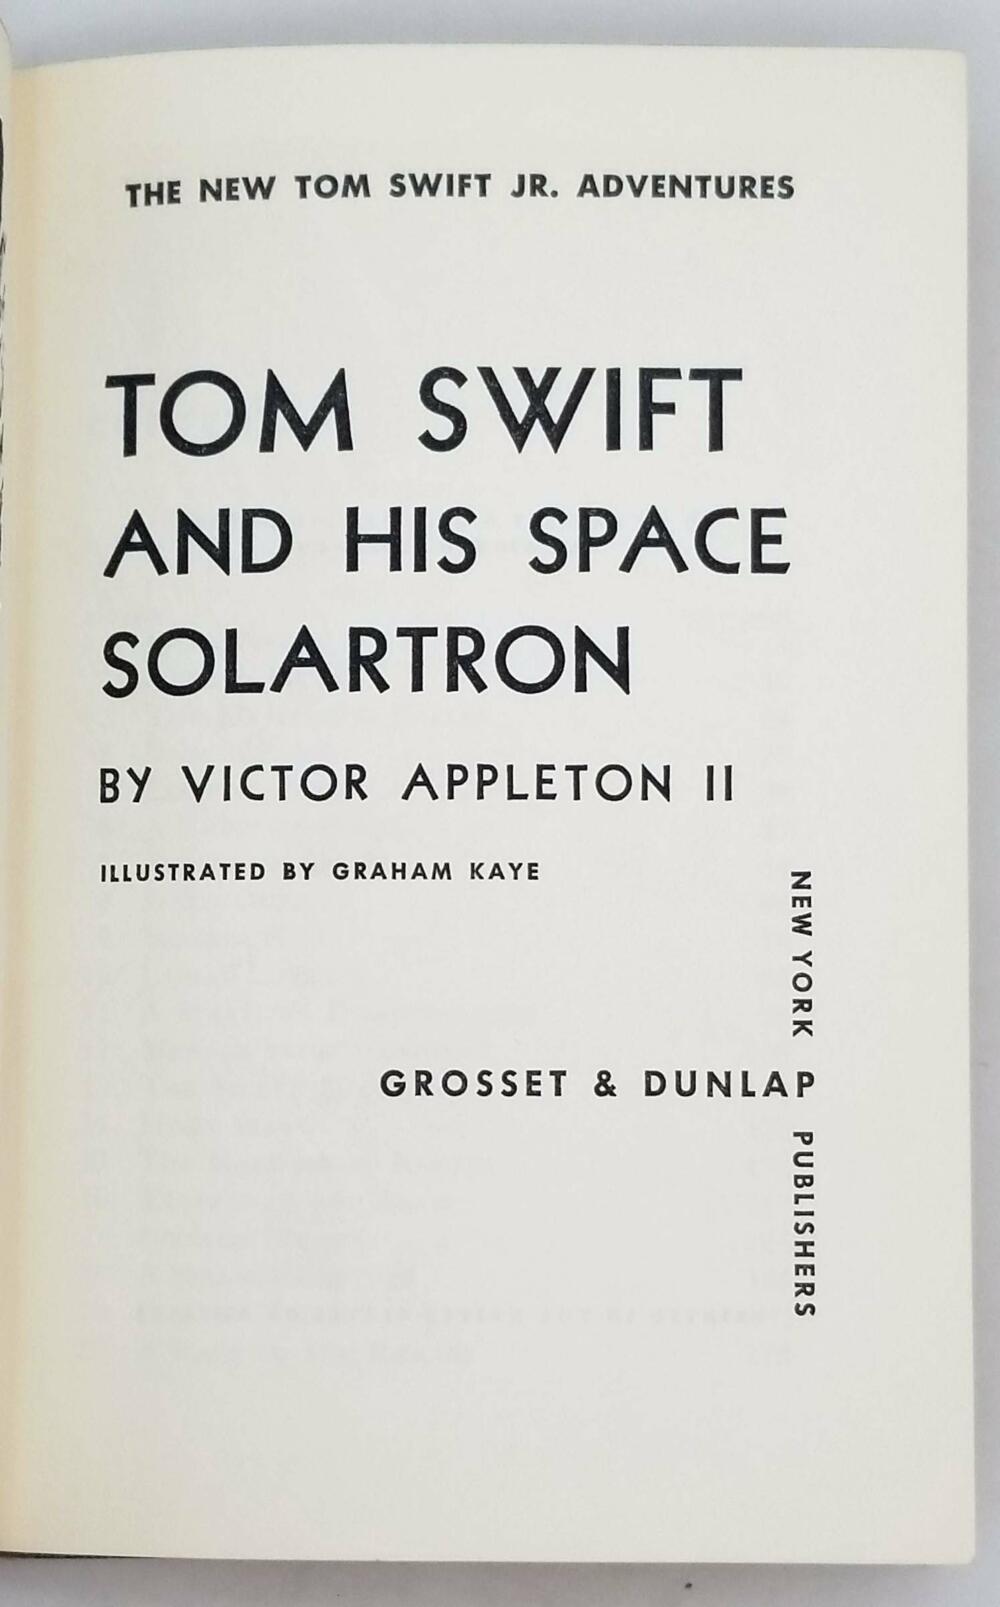 Tom Swift Jr. and His Space Solartron 1958 (Book 13)